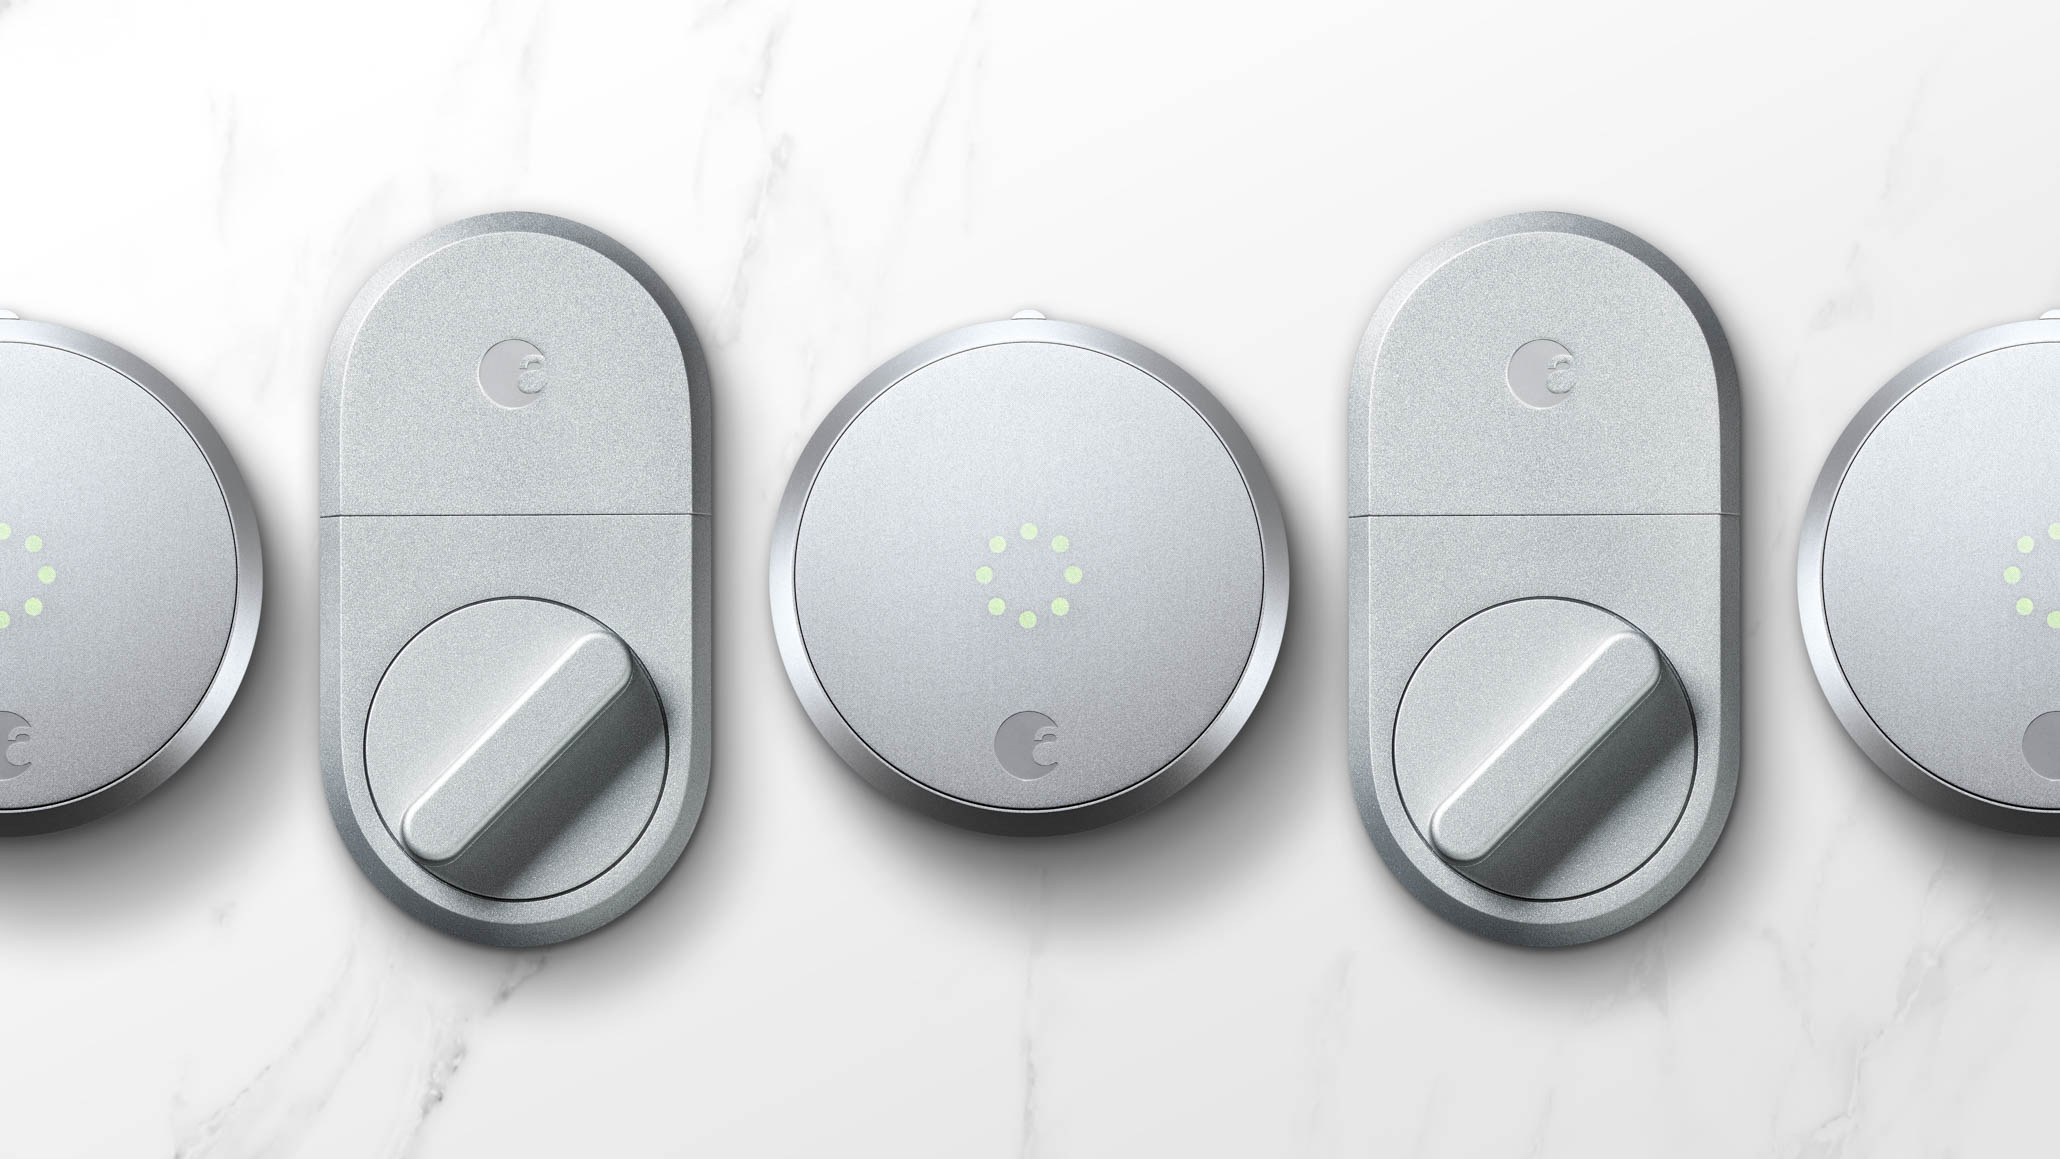 The August Smart Lock and Smart Lock Pro can be opened with a voice command and a PIN code with new Google Assistant skills. Image: August Home.